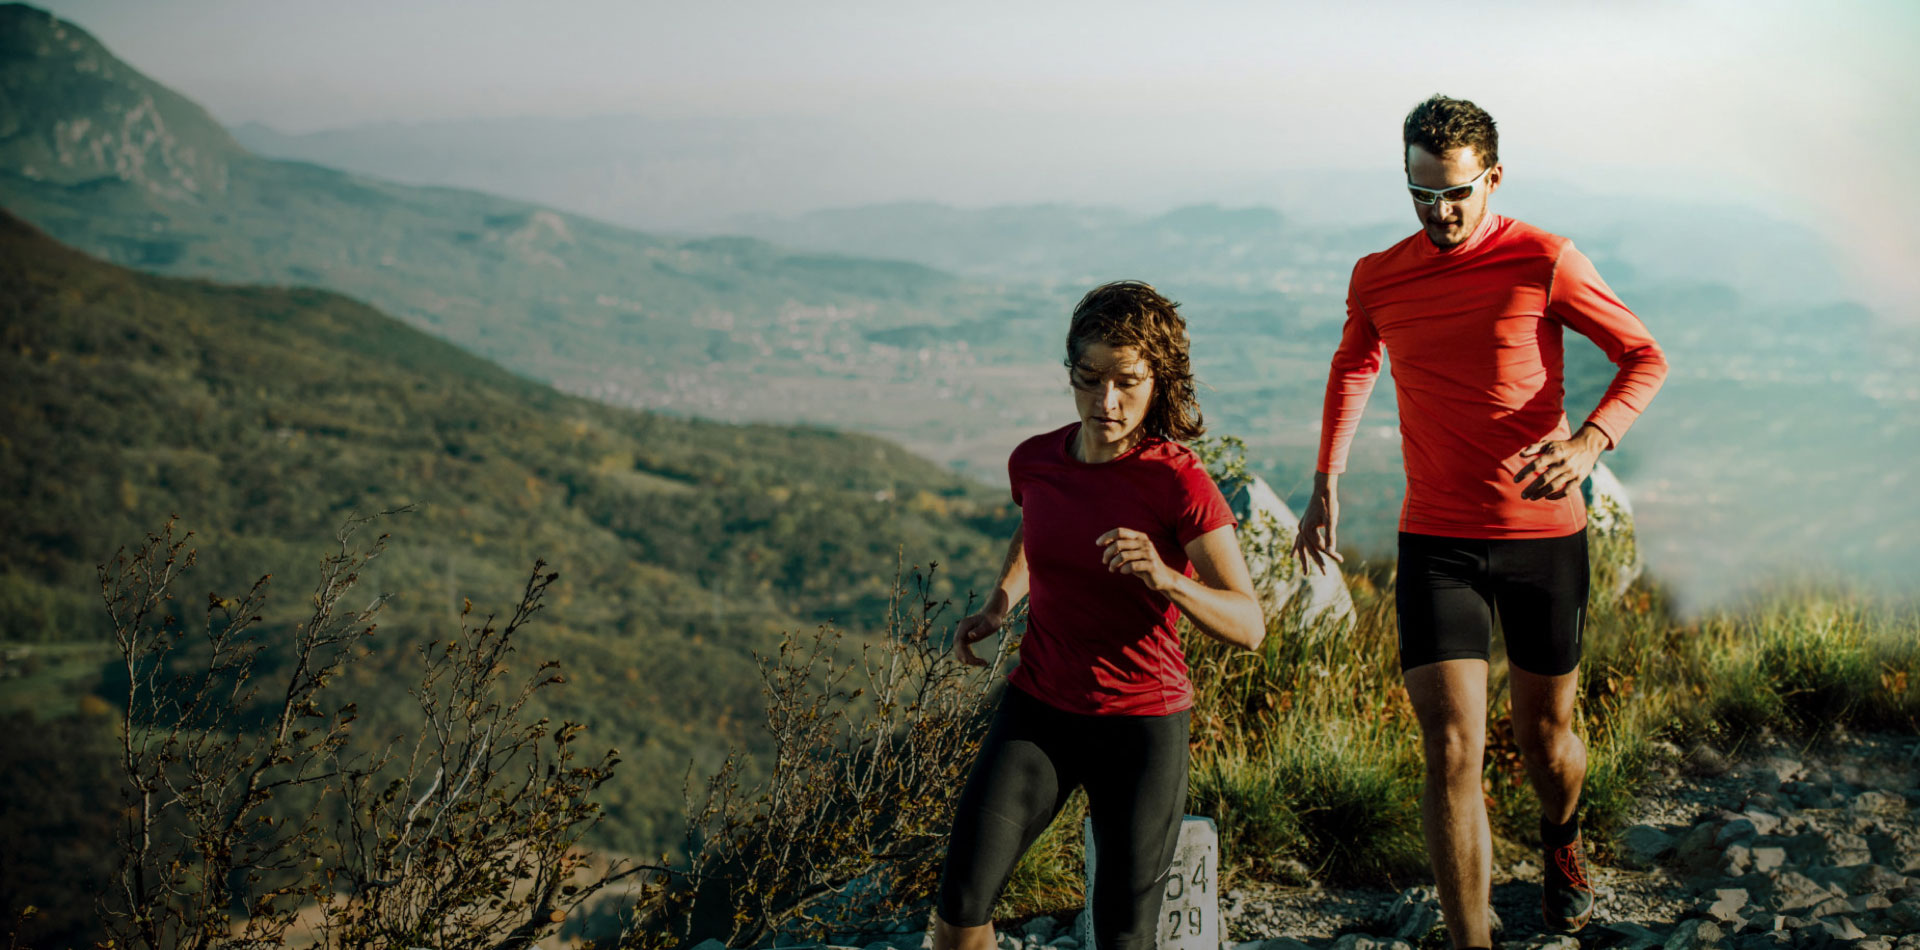 Man and woman training on running trails